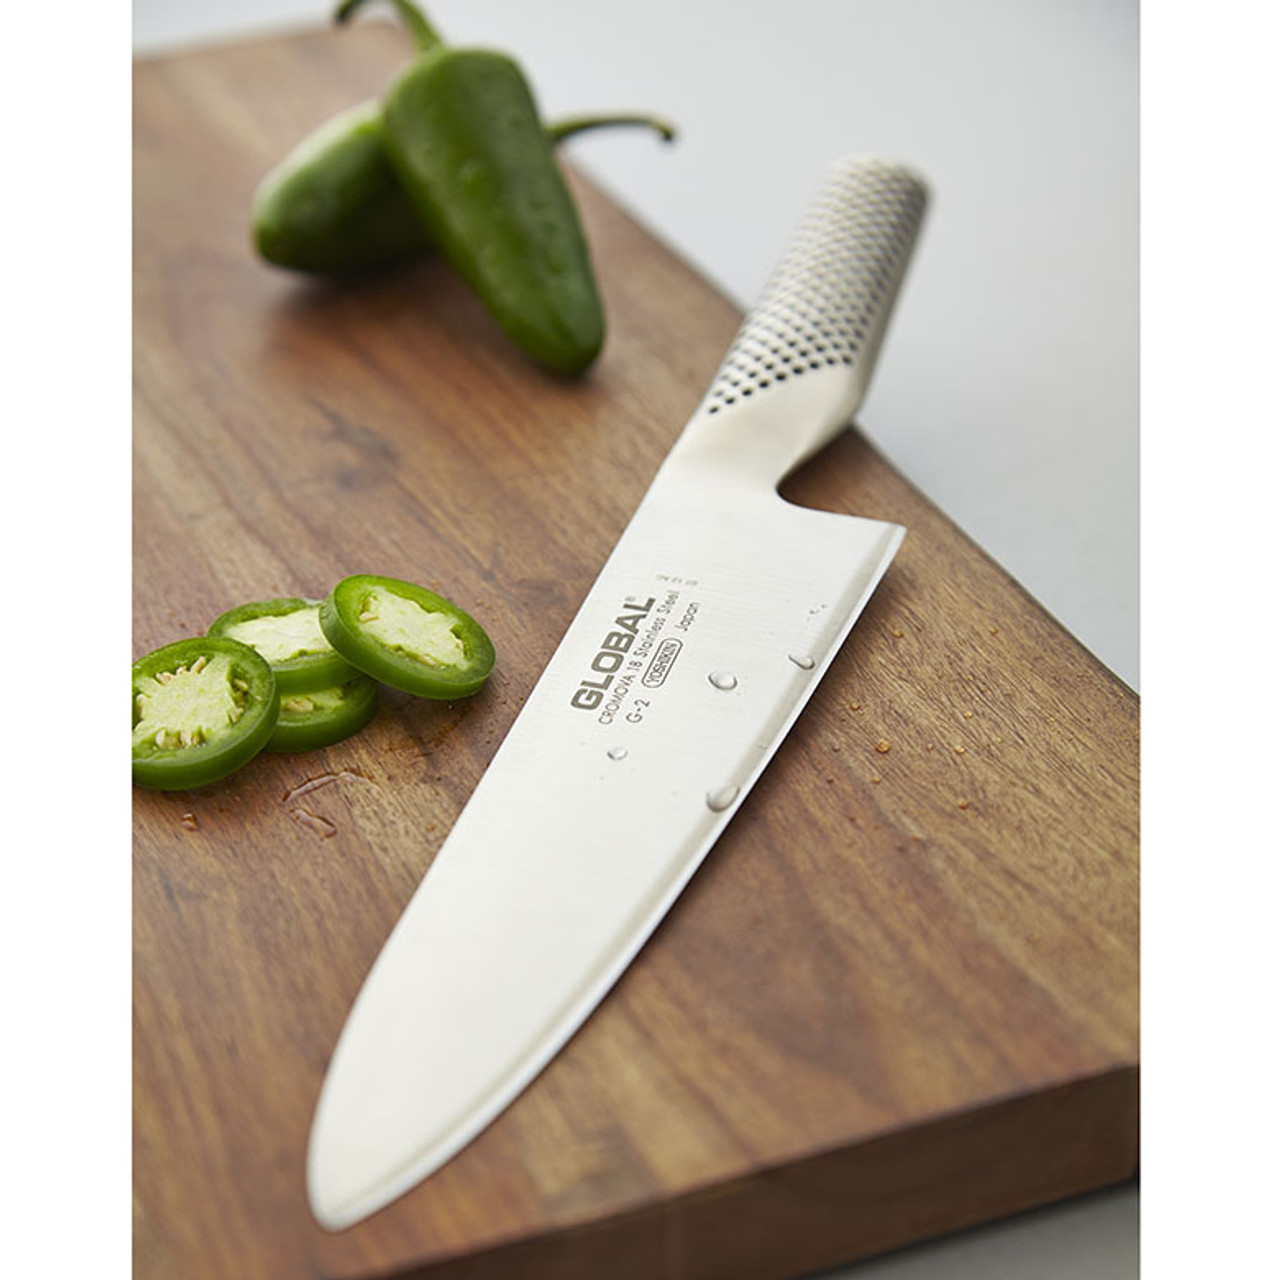 https://cdn11.bigcommerce.com/s-hccytny0od/images/stencil/1280x1280/products/310/4131/global-classic-chefs-knife__93657.1514869833.jpg?c=2?imbypass=on